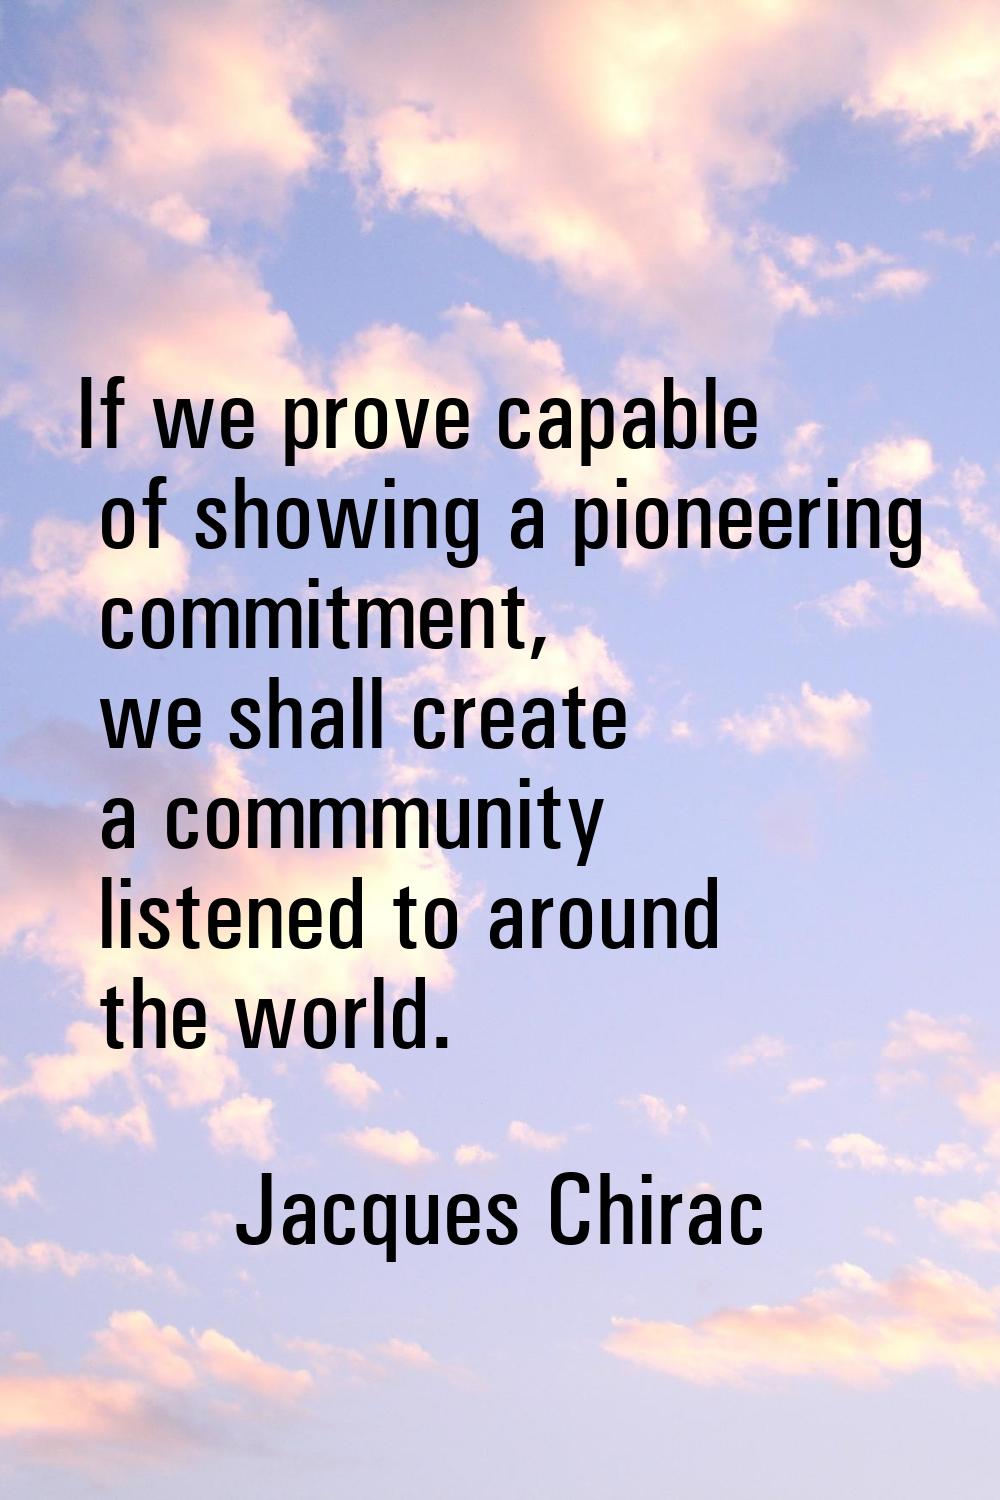 If we prove capable of showing a pioneering commitment, we shall create a commmunity listened to ar